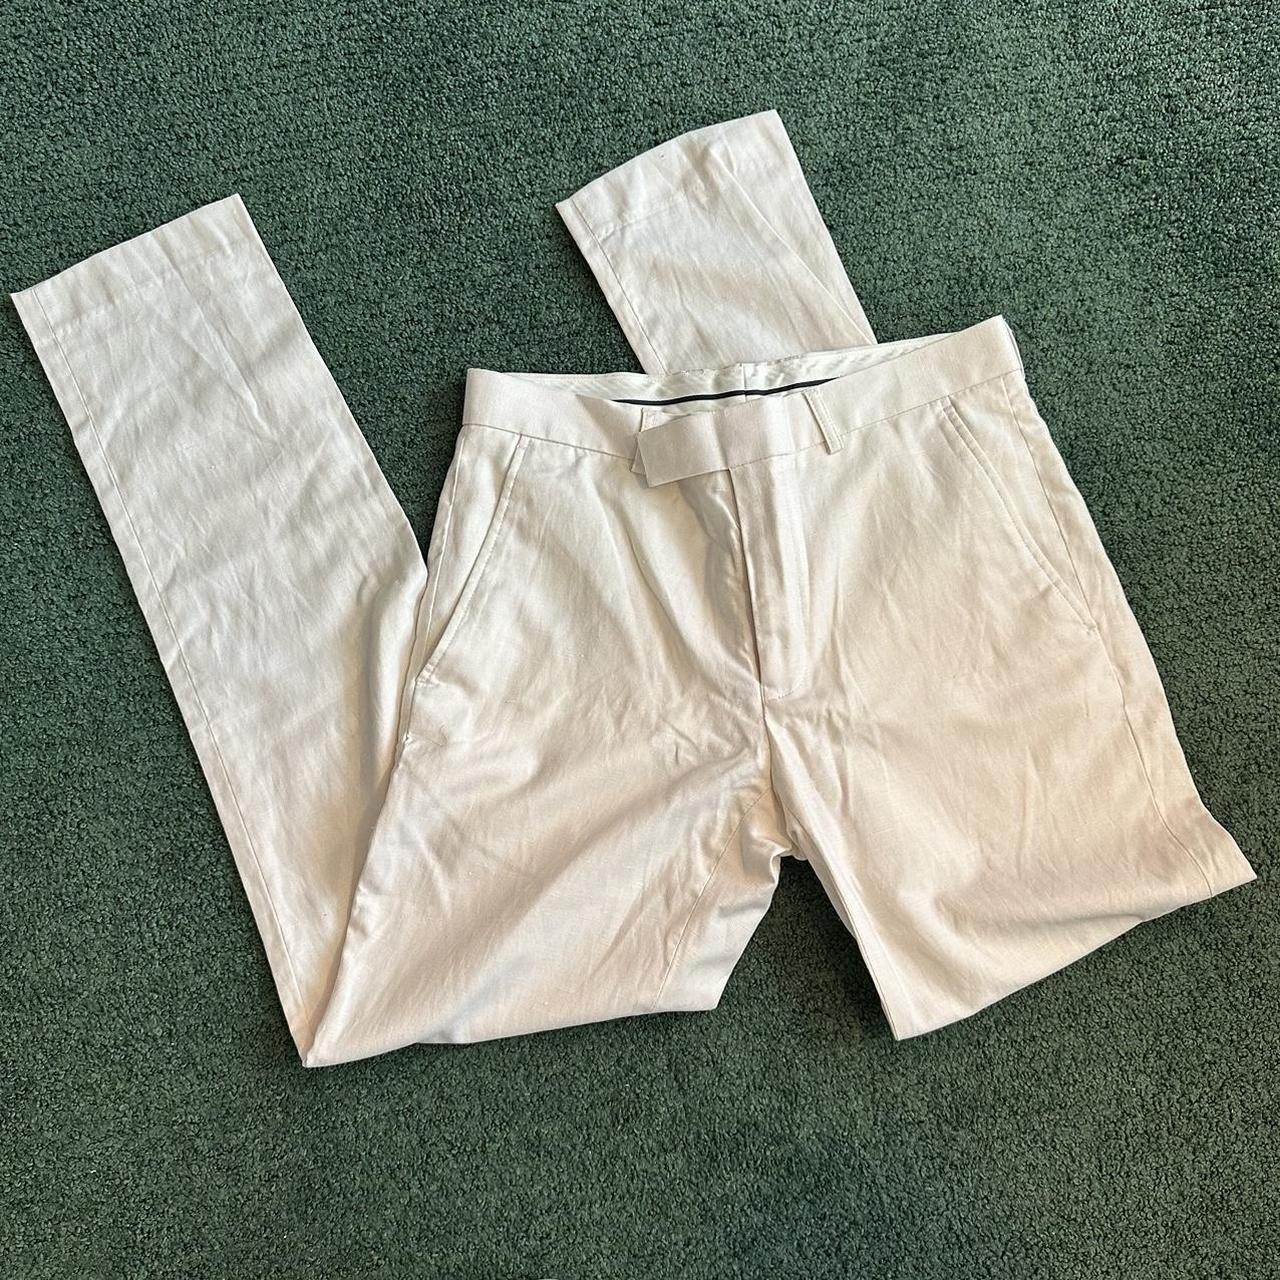 Rudie White Linen Pants Crushed since I haven’t... - Depop